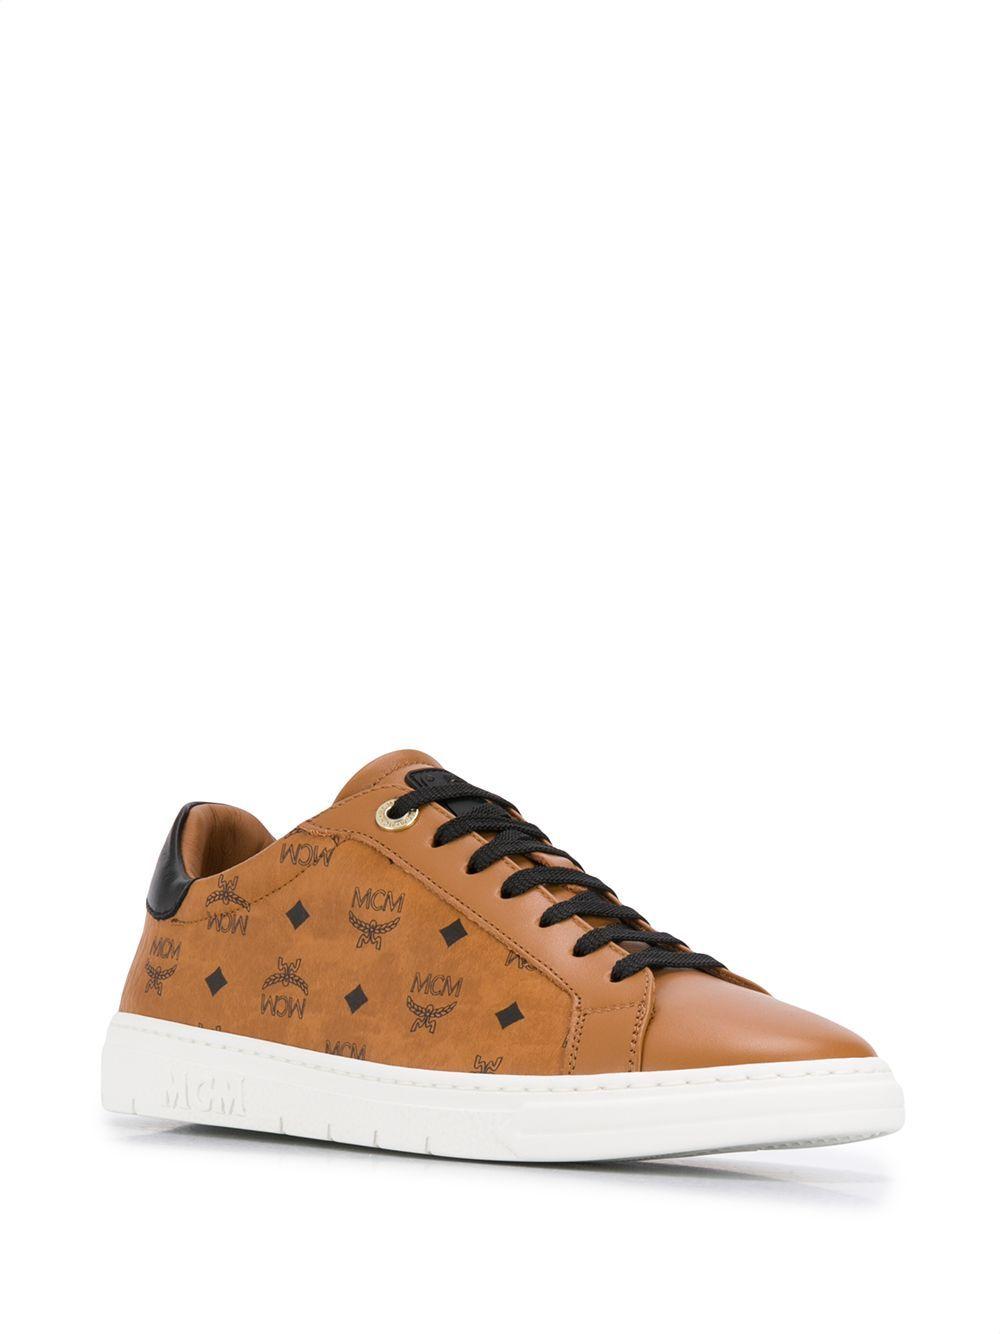 MCM Leather Sneakers in Brown - Lyst